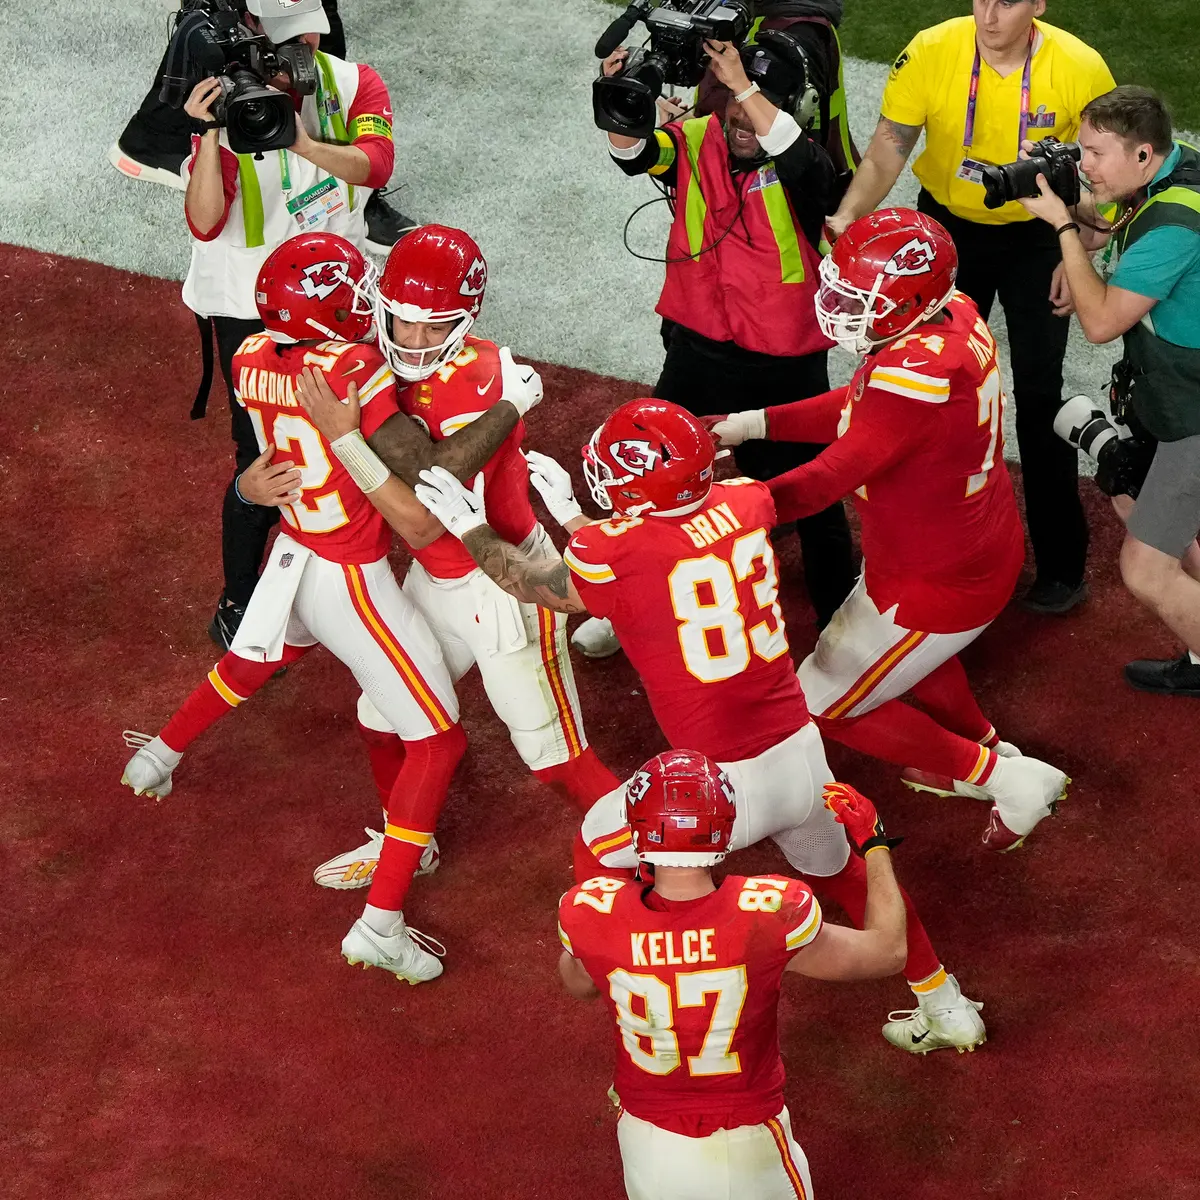 Patrick Mahomes and other teammates celebrate with Chiefs receiver, Mecole Hardman, after catching the game winning touchdown in overtime to win the Super Bowl. The game winning drive  helped the team secure their third win in their recent dynasty.